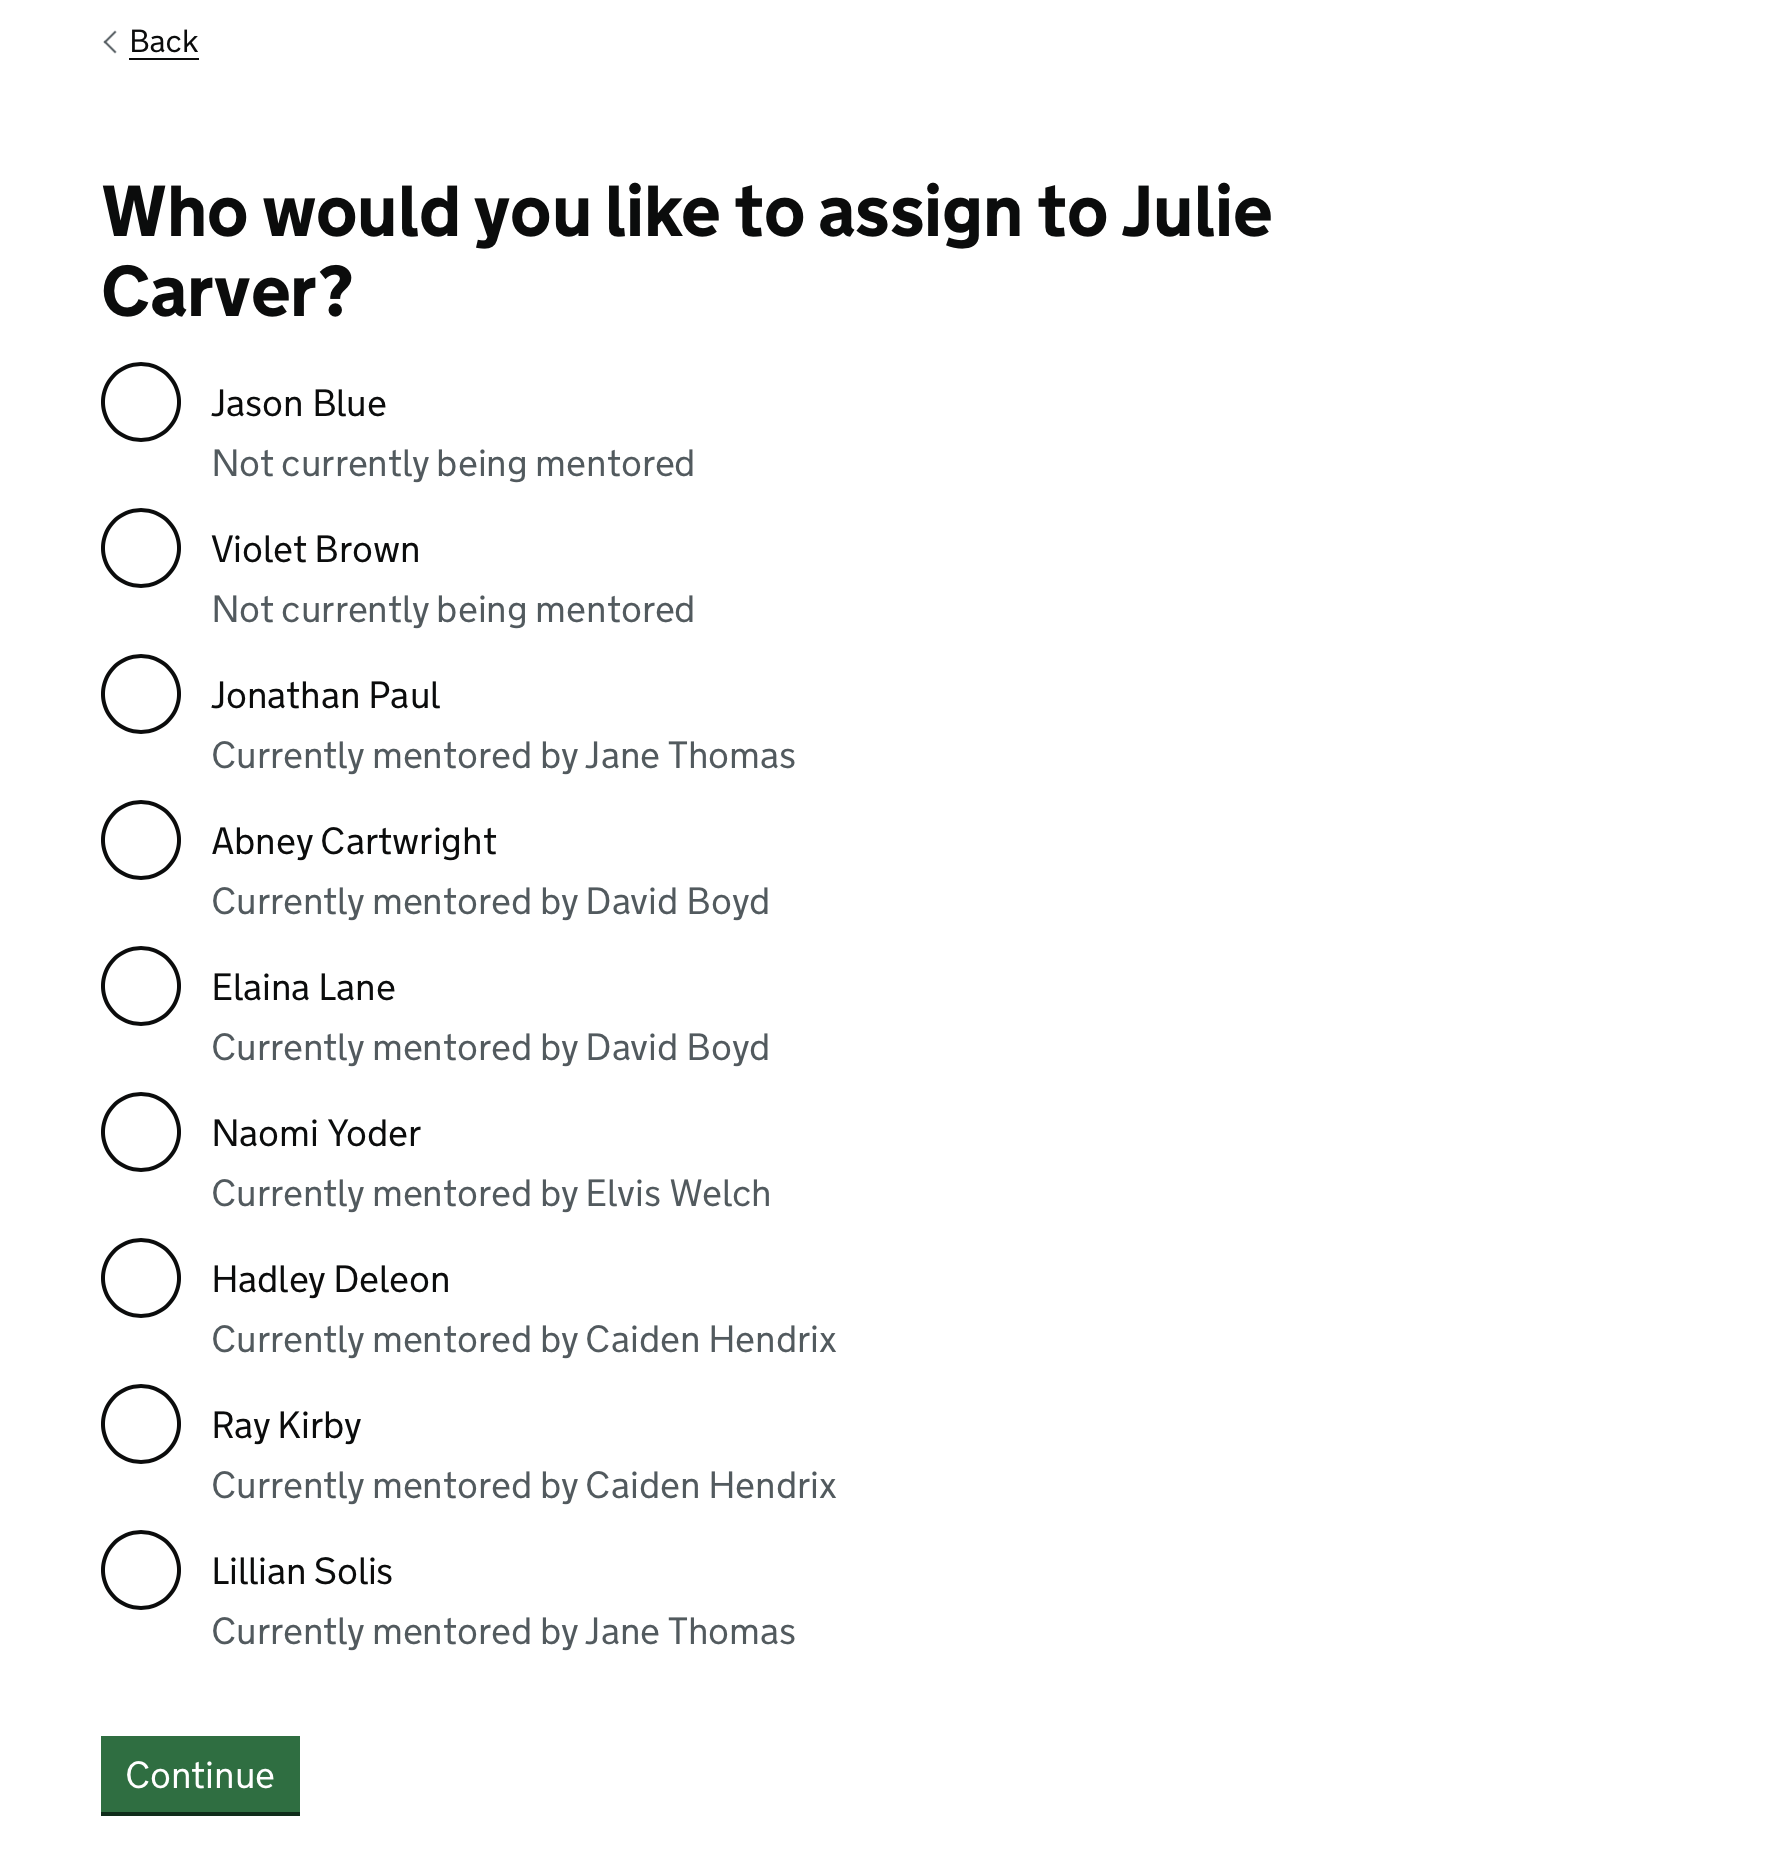 Screenshot of a page asking 'Who would you like to assign to Julie Carver?' with radio button options for each ECT